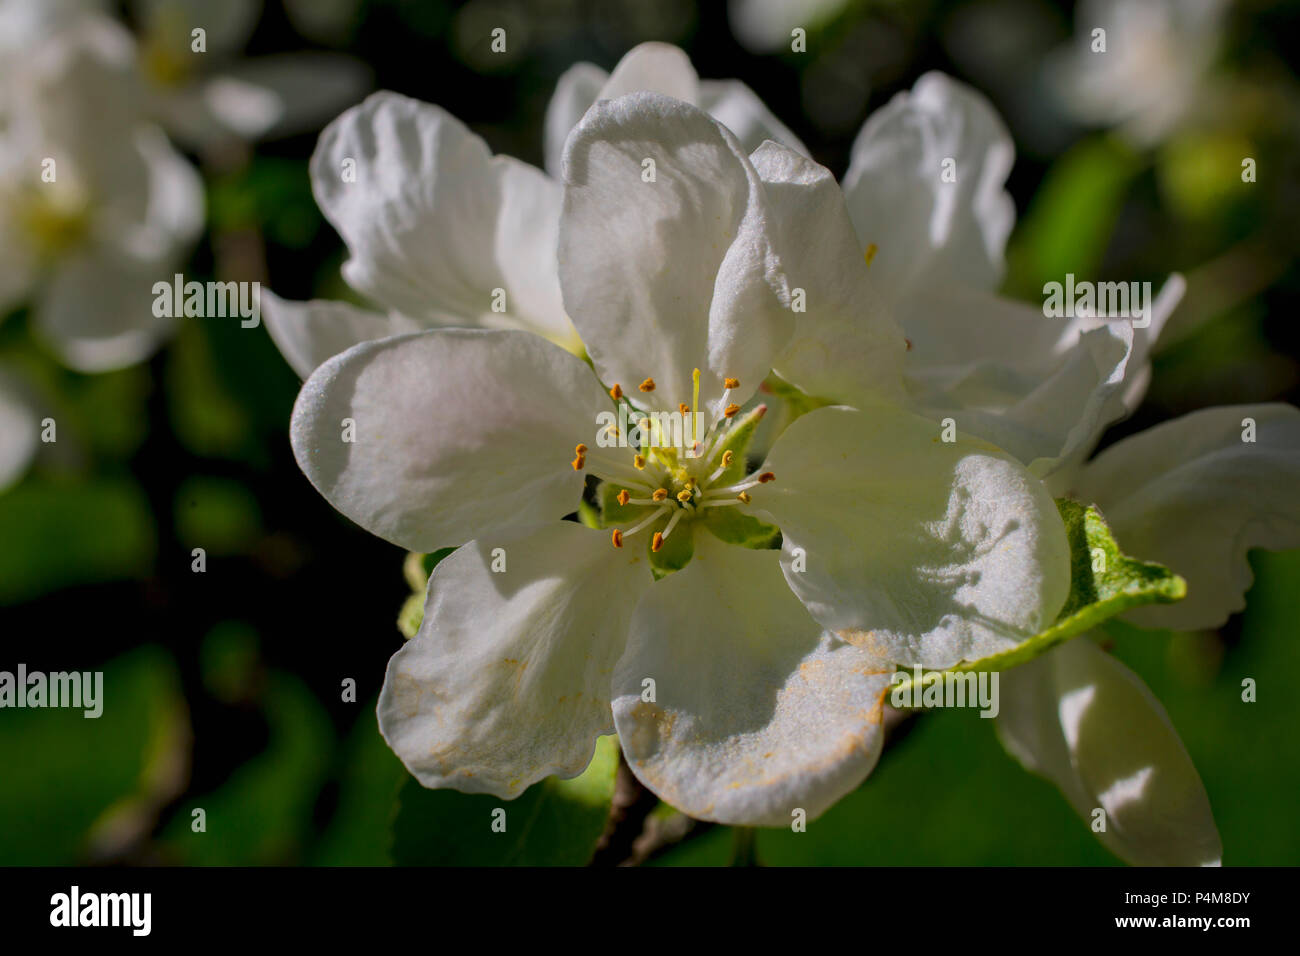 Apple Blossoms, Eastern Townships, Iron hill, Quebec, Canada Stock Photo